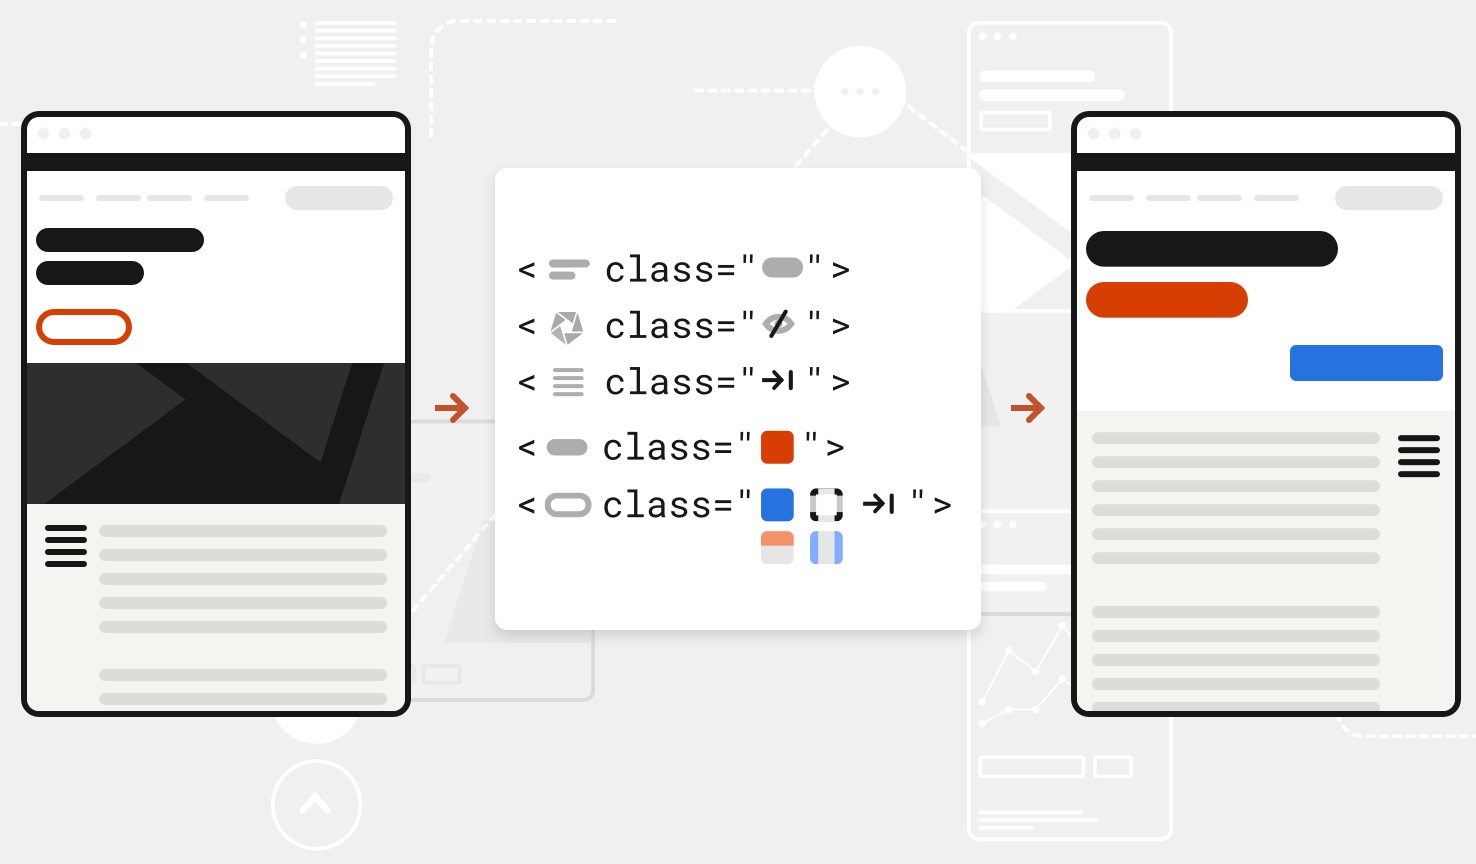 This illustration shows another before-and-after example of how a website can use utility classes to change the styles of site elements. Five stylized examples of code are given below the two versions of the page.